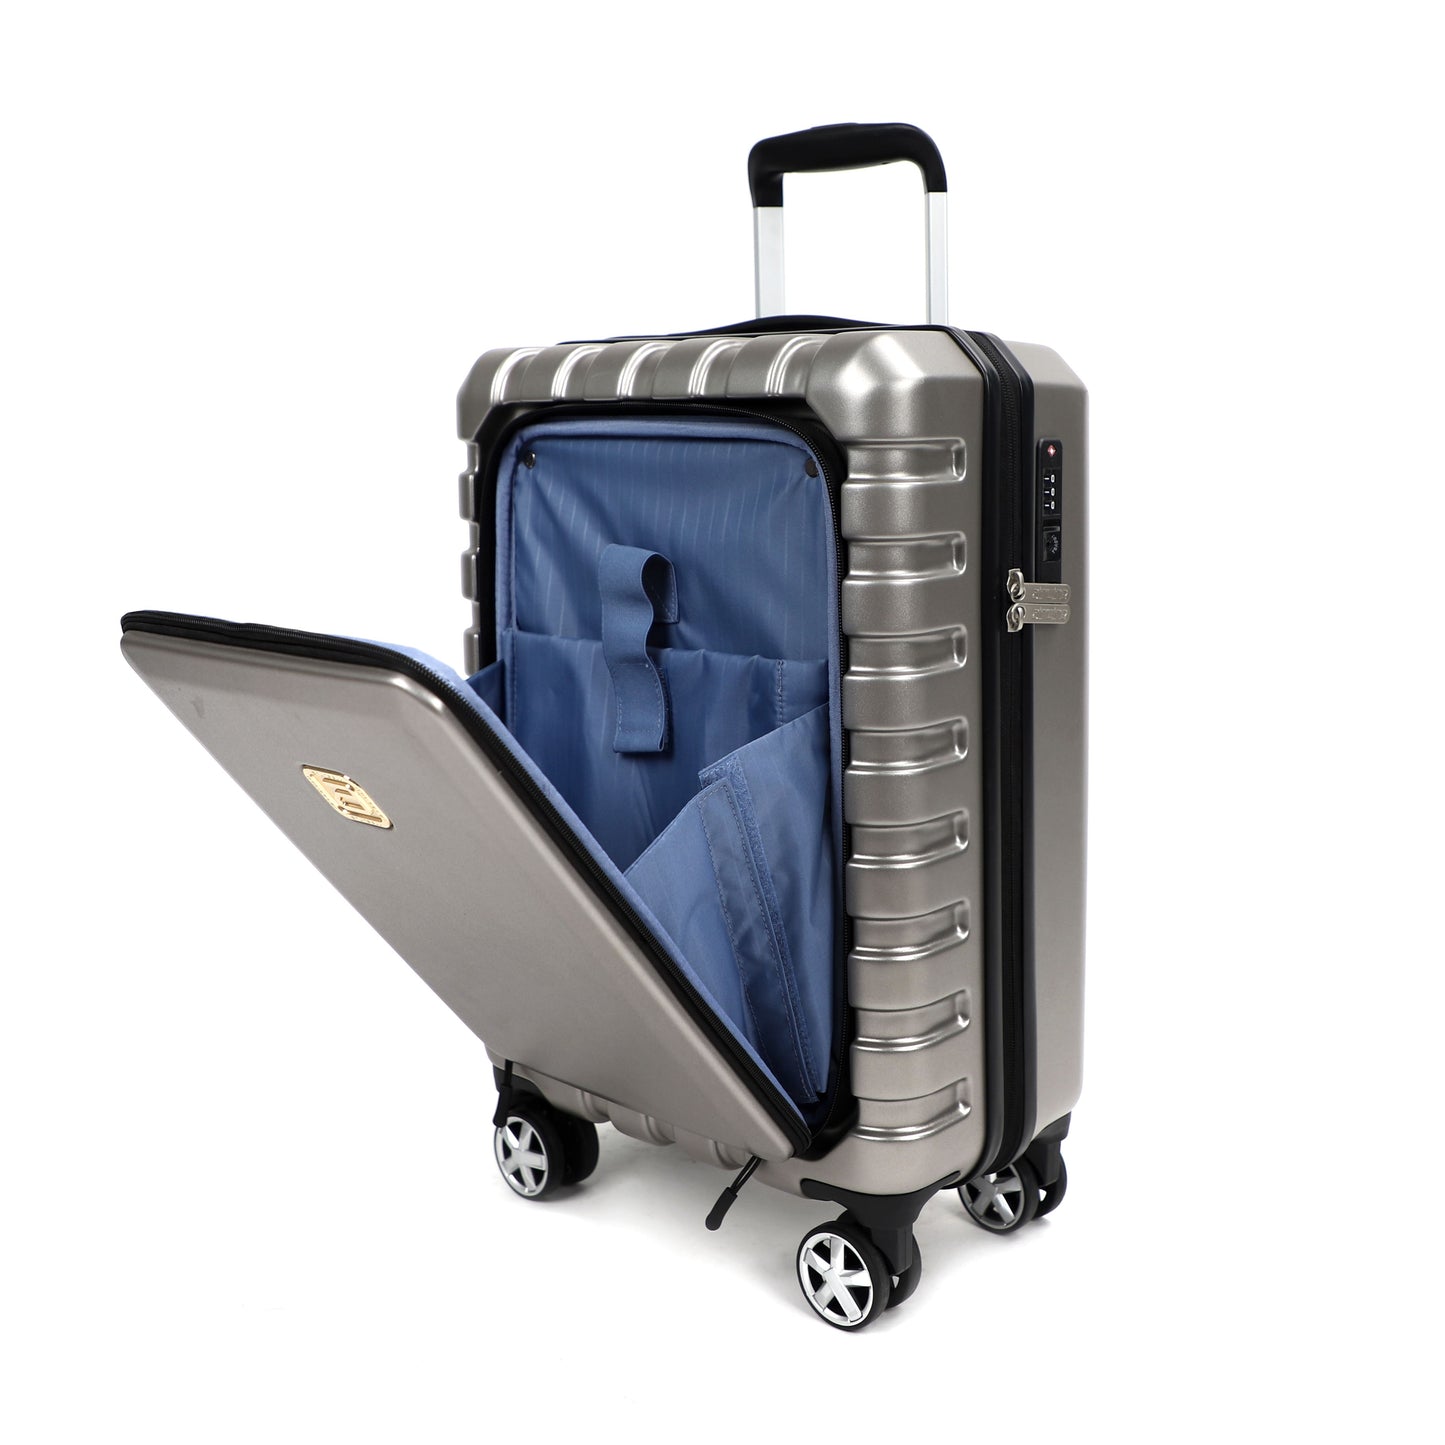 Airline_Carry_On_Luggage_iron_grey_Side_view_02T1978155101